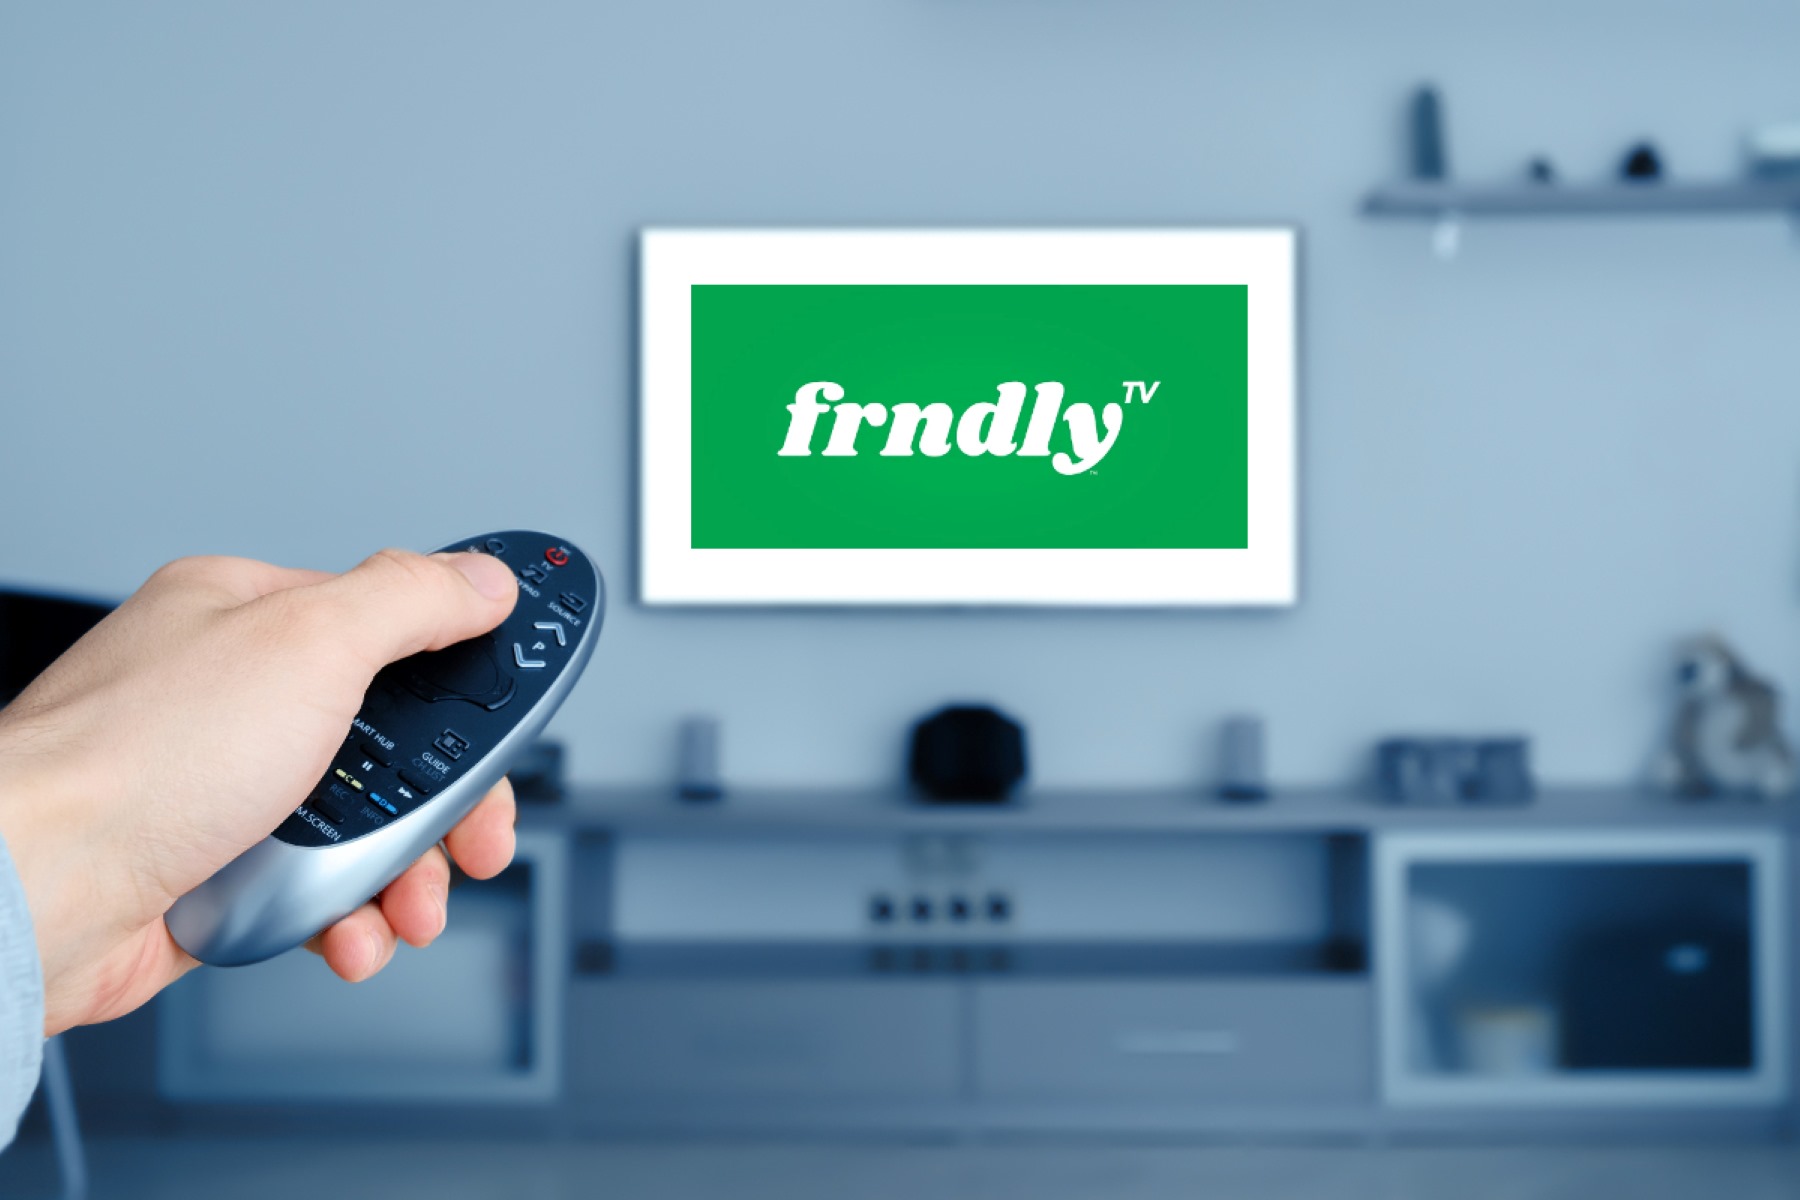 How To Watch Frndly TV